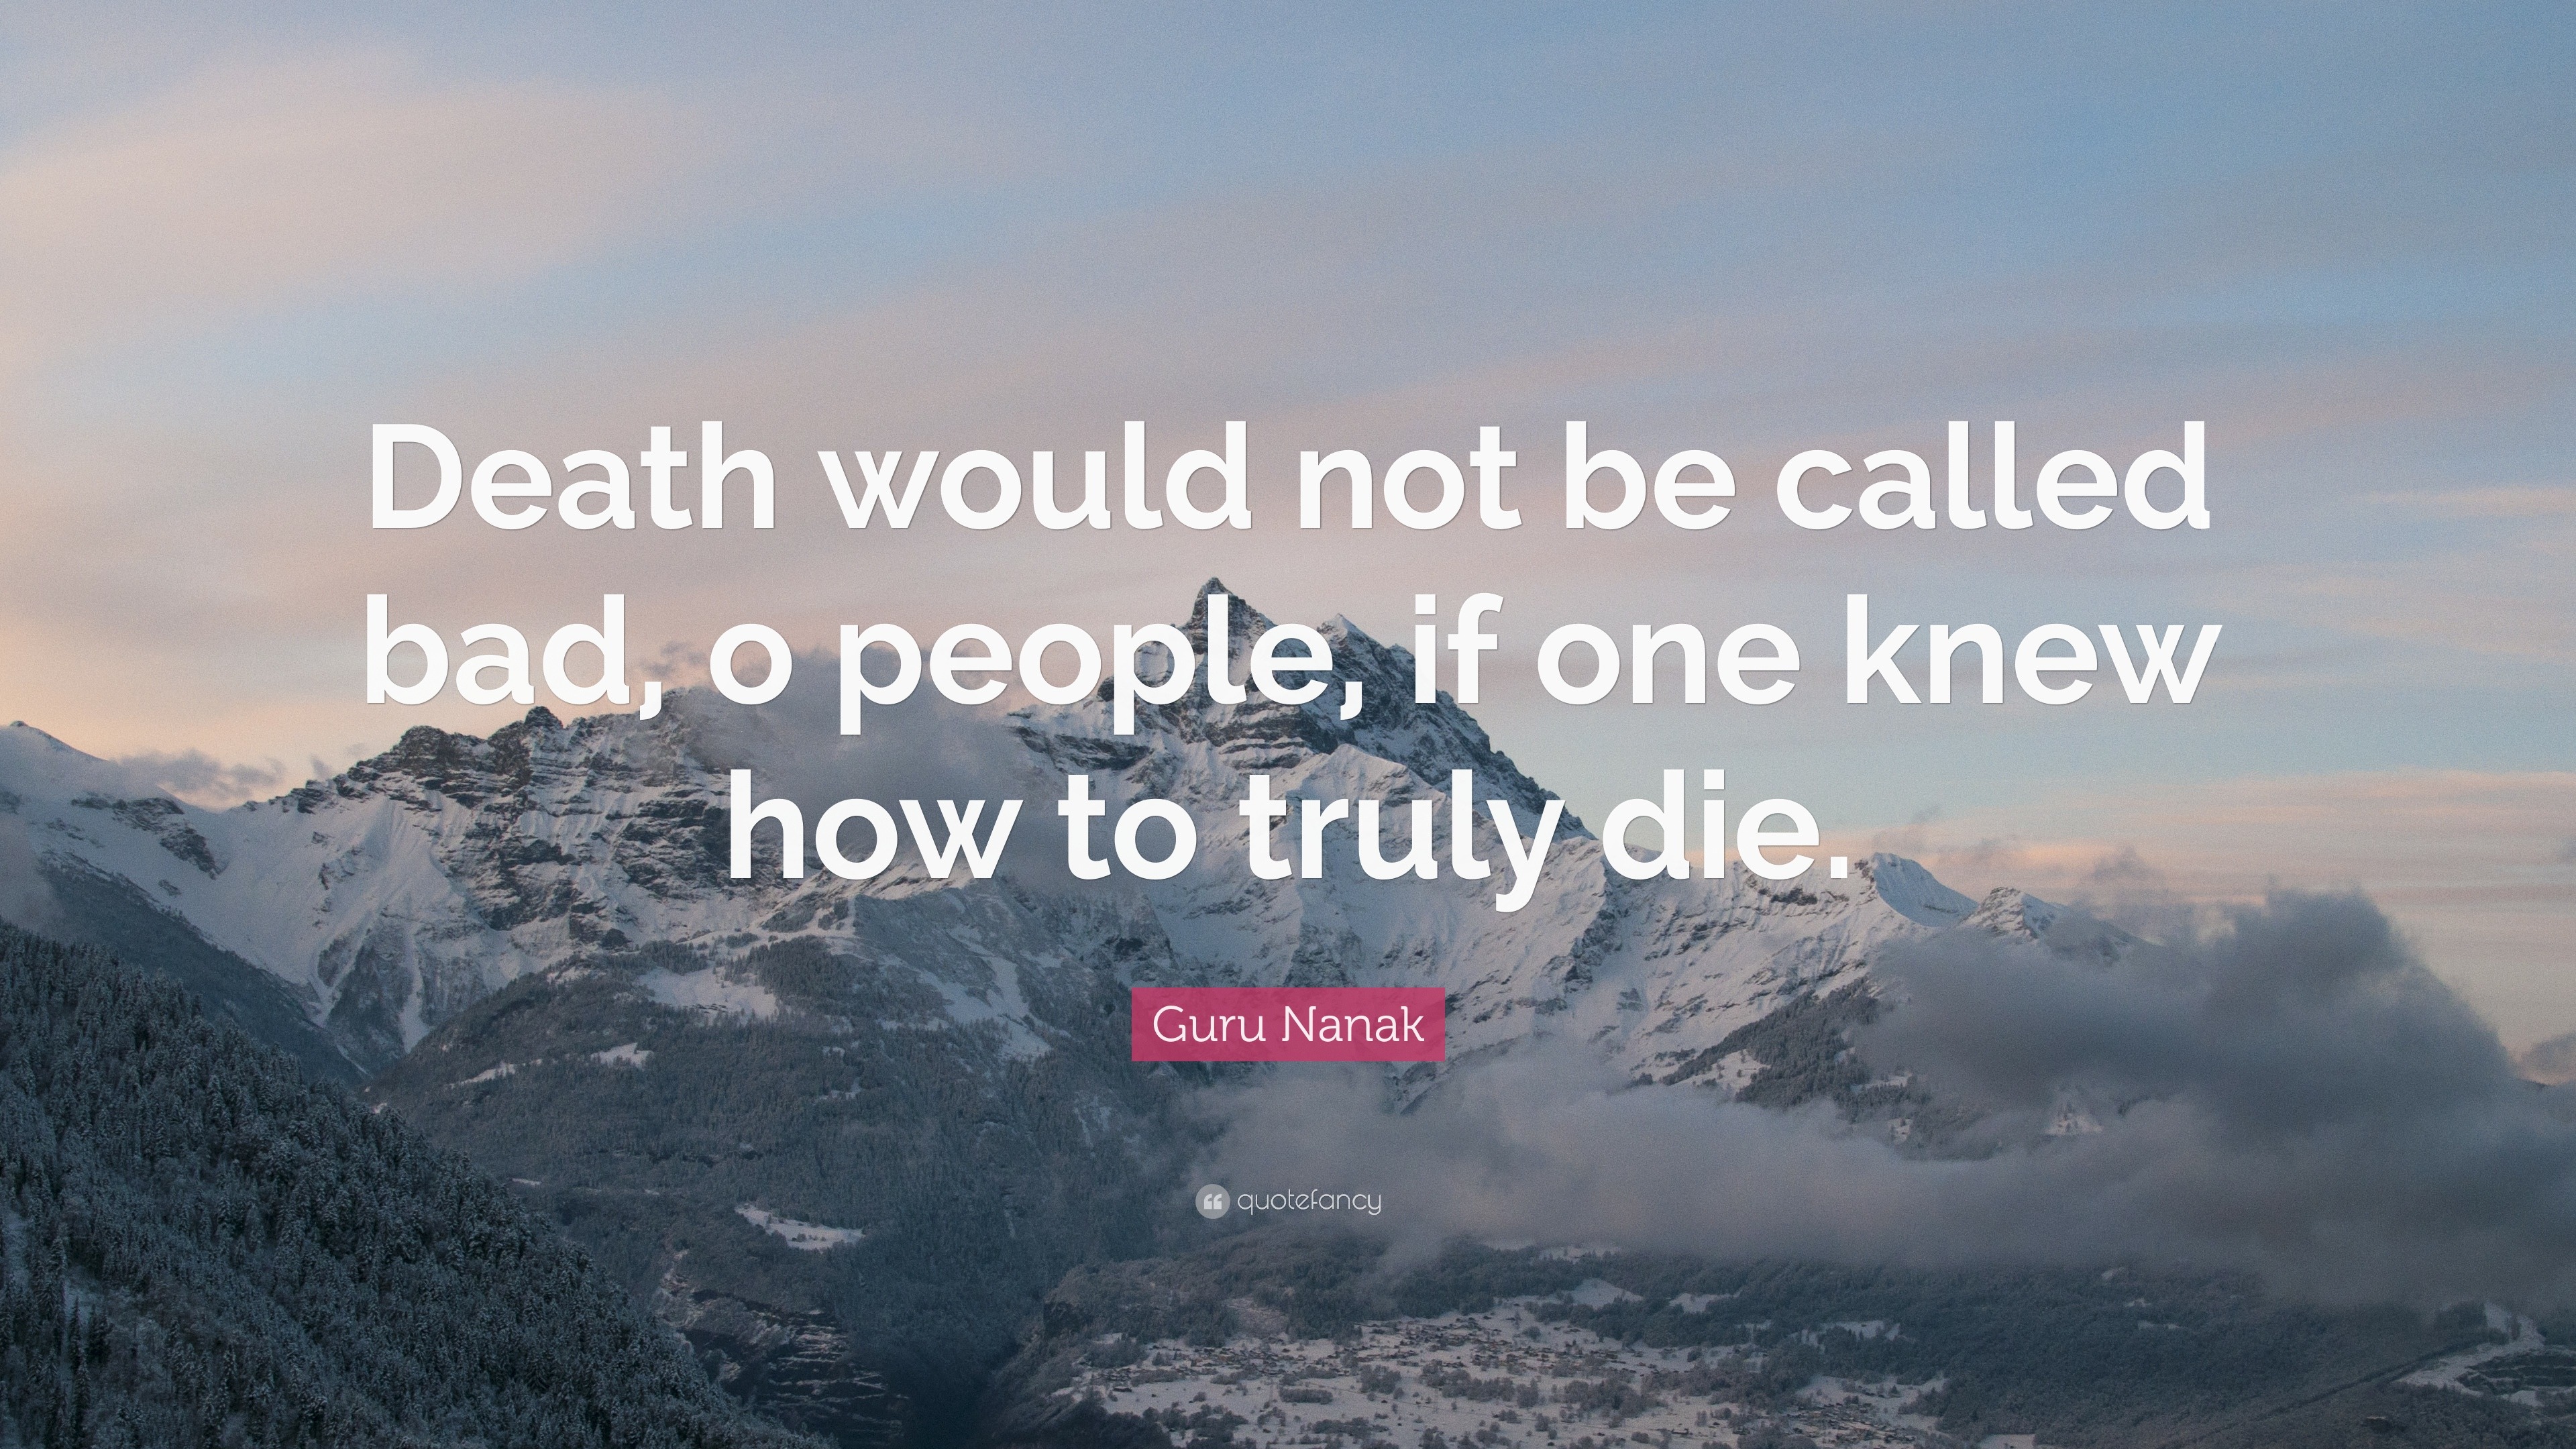 Guru Nanak Quote: “Death would not be called bad, o people, if one knew ...